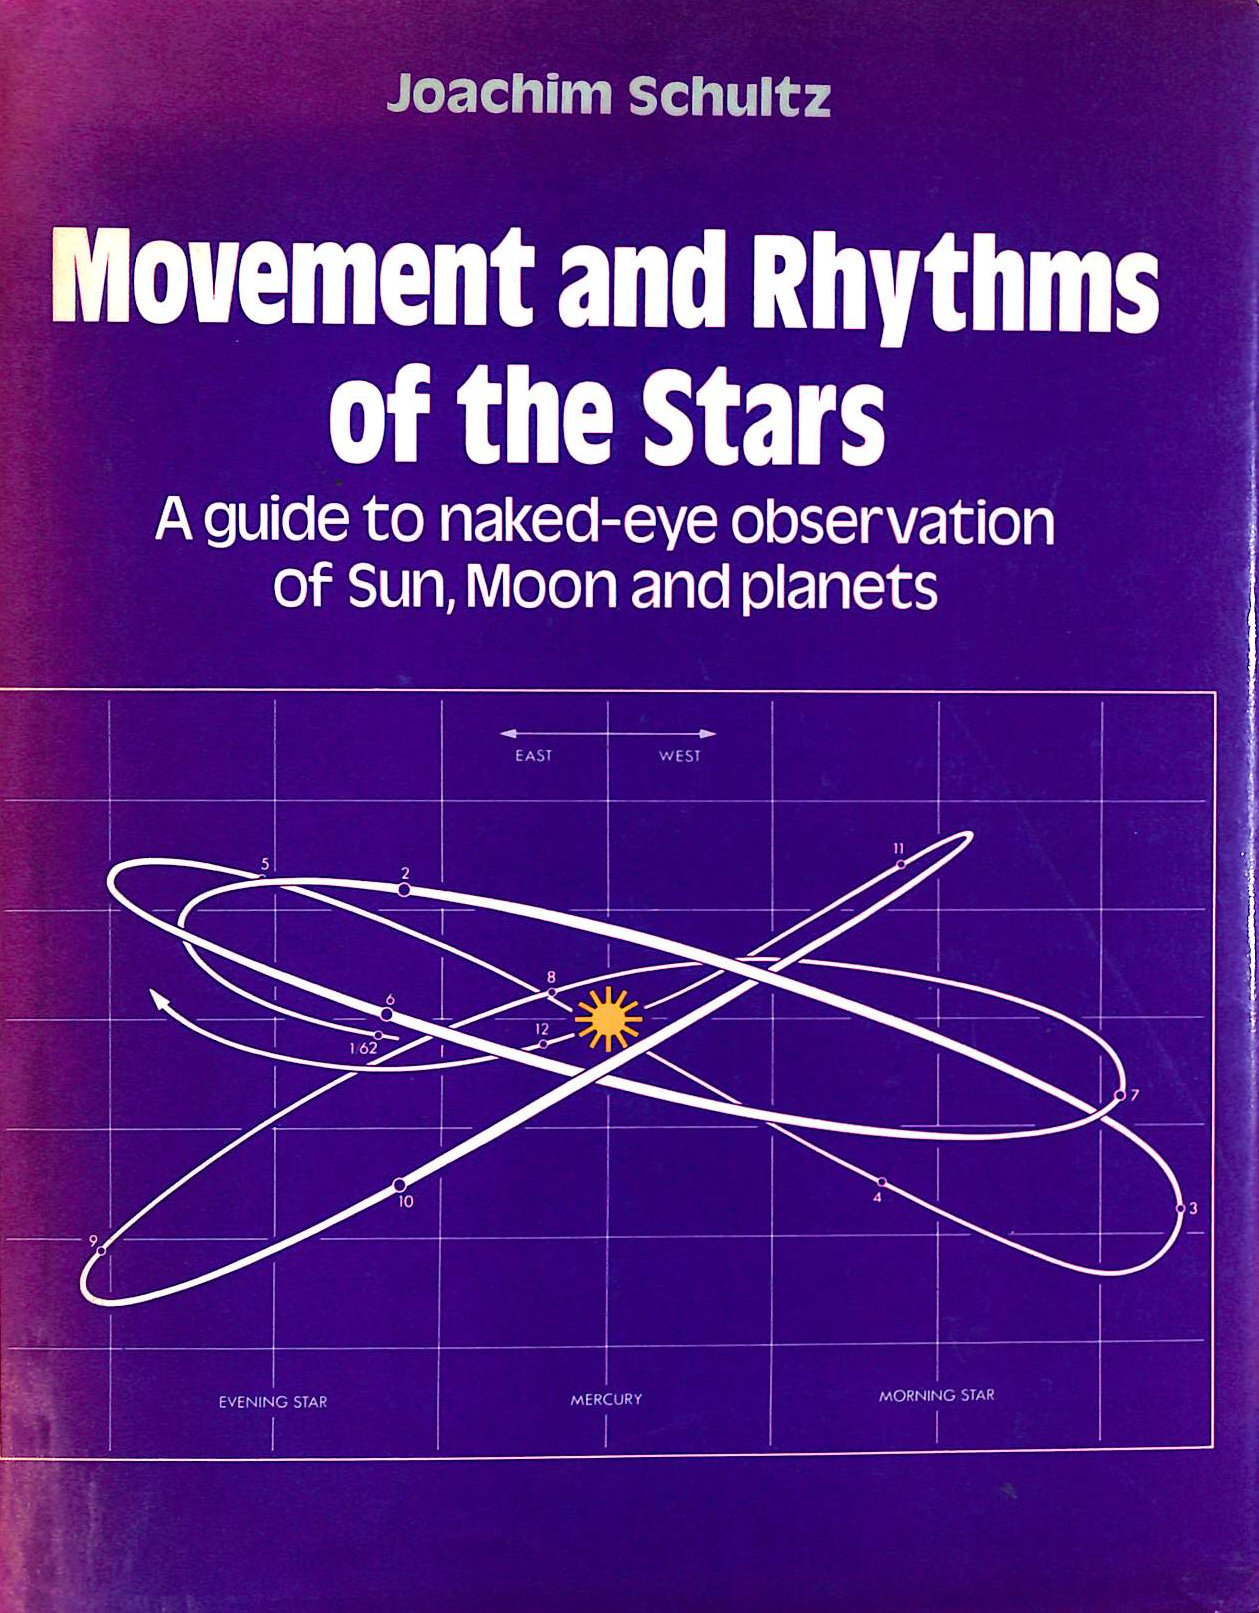 SCHULTZ, JOACHIM; MEEKS, J. [TRANSLATOR]; MACLEAN, C. [TRANSLATOR]; - Movement and Rhythms of the Stars: Guide to Naked-eye Observations of Sun, Moon and Planets